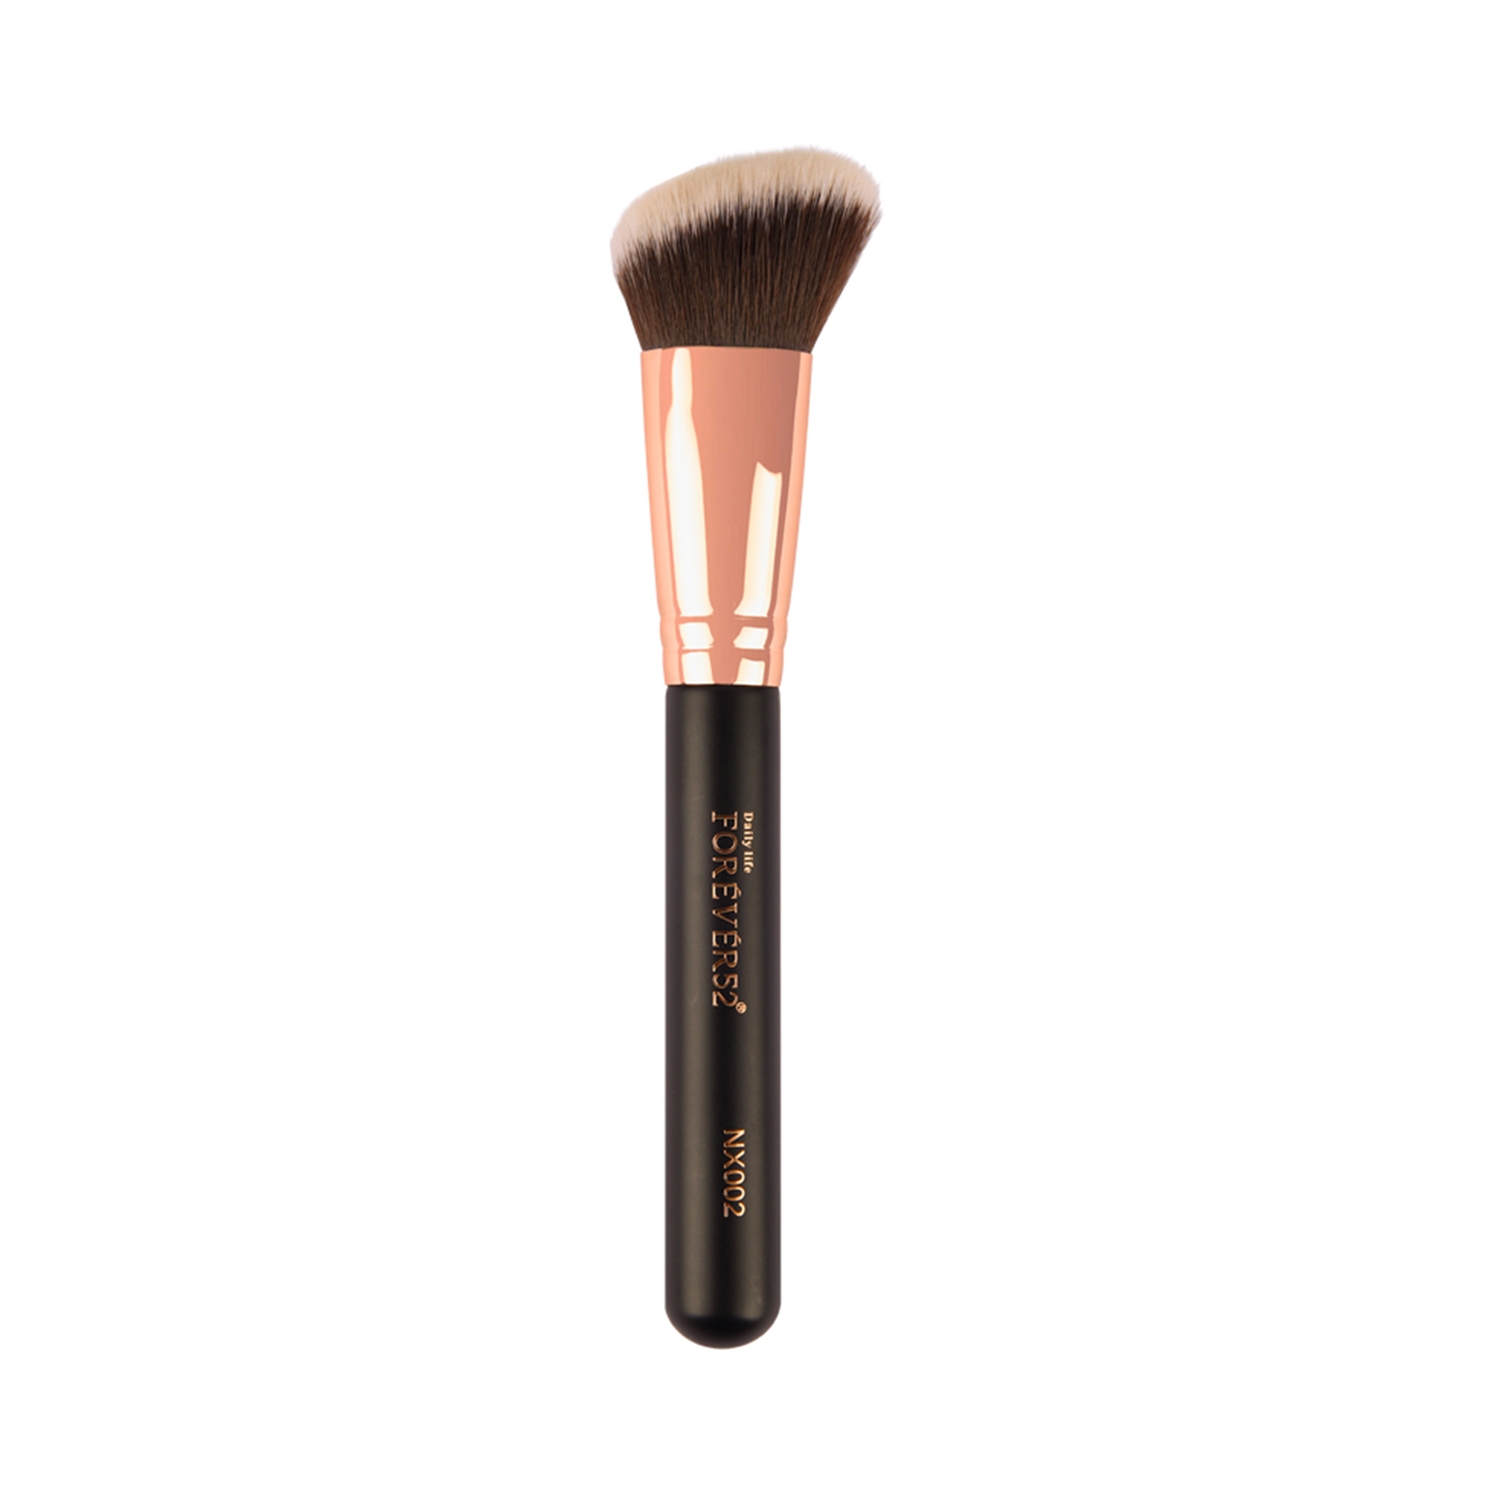 Daily Life Forever52 | Daily Life Forever52 Angled Face Brush - NX002 (1Pc)